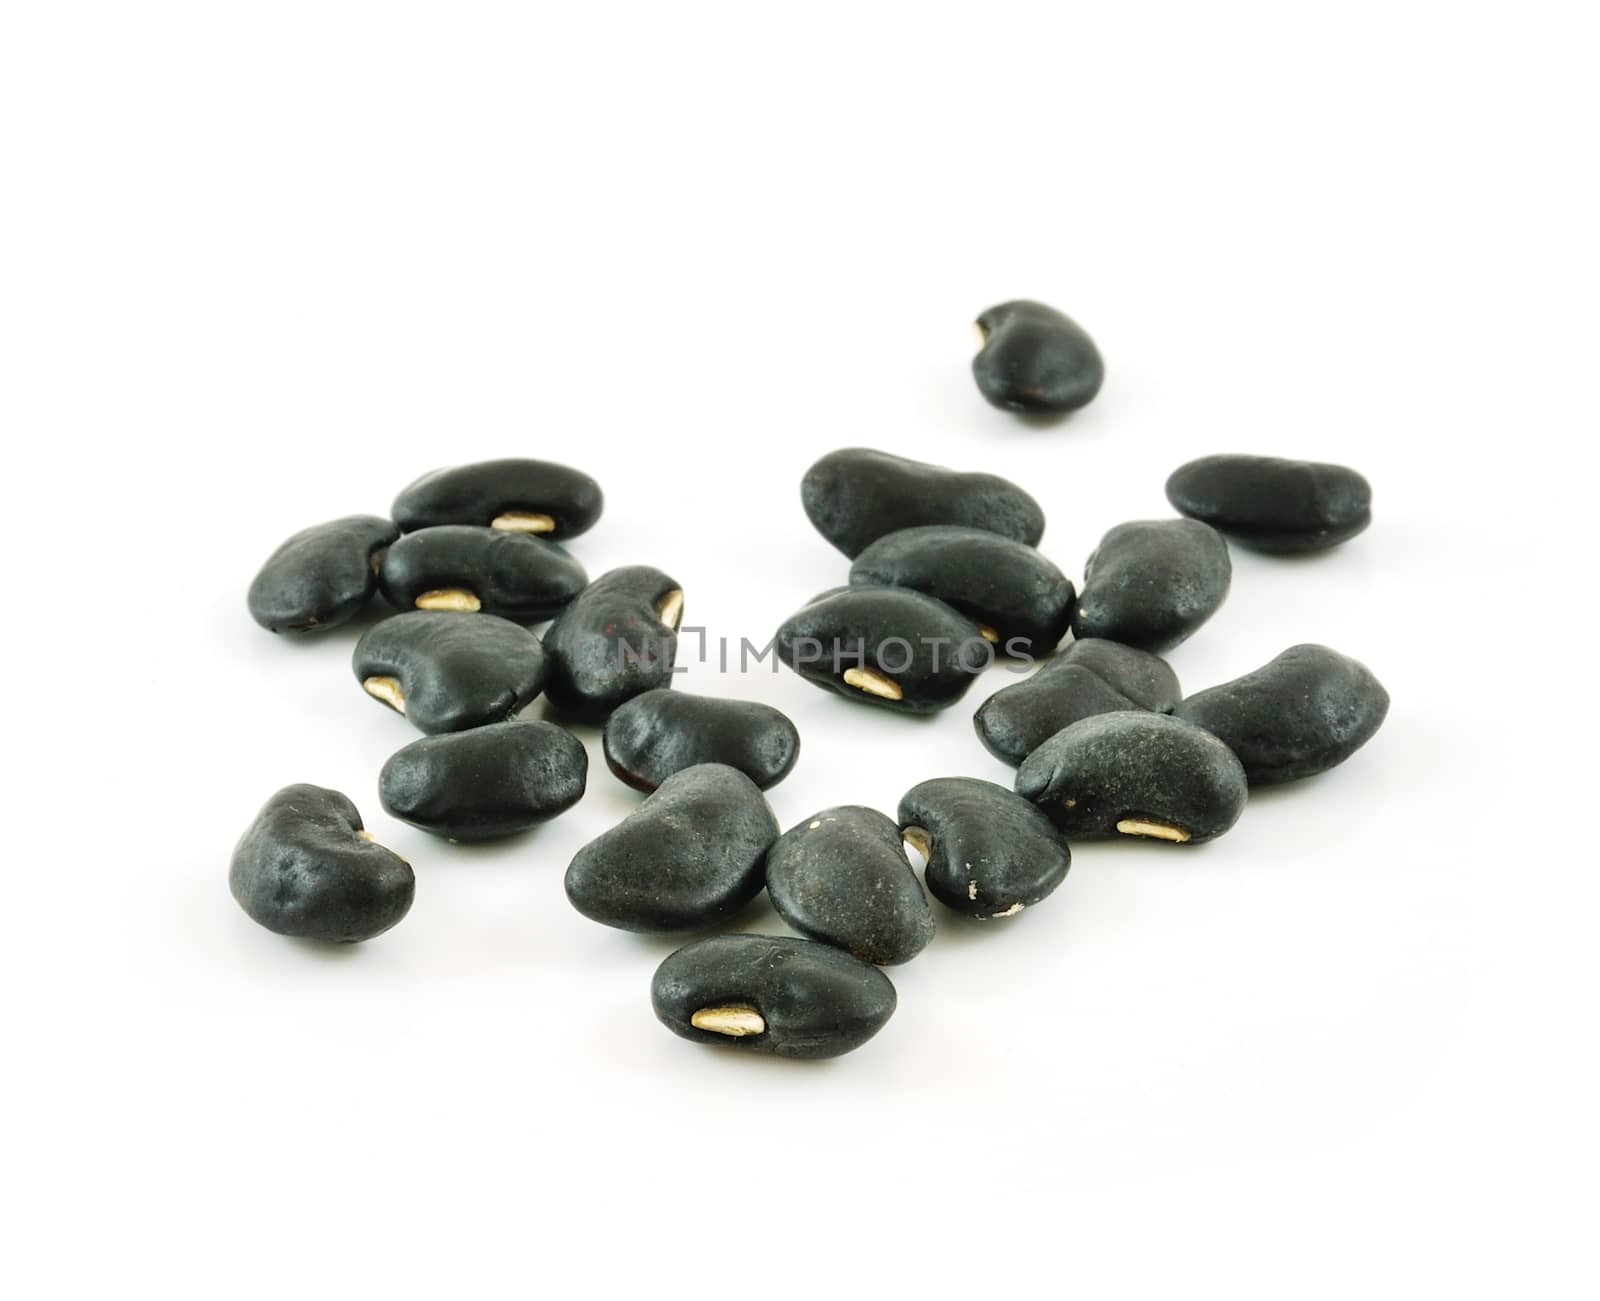 A small handful of black beans - preto. Beans isolated on a white background